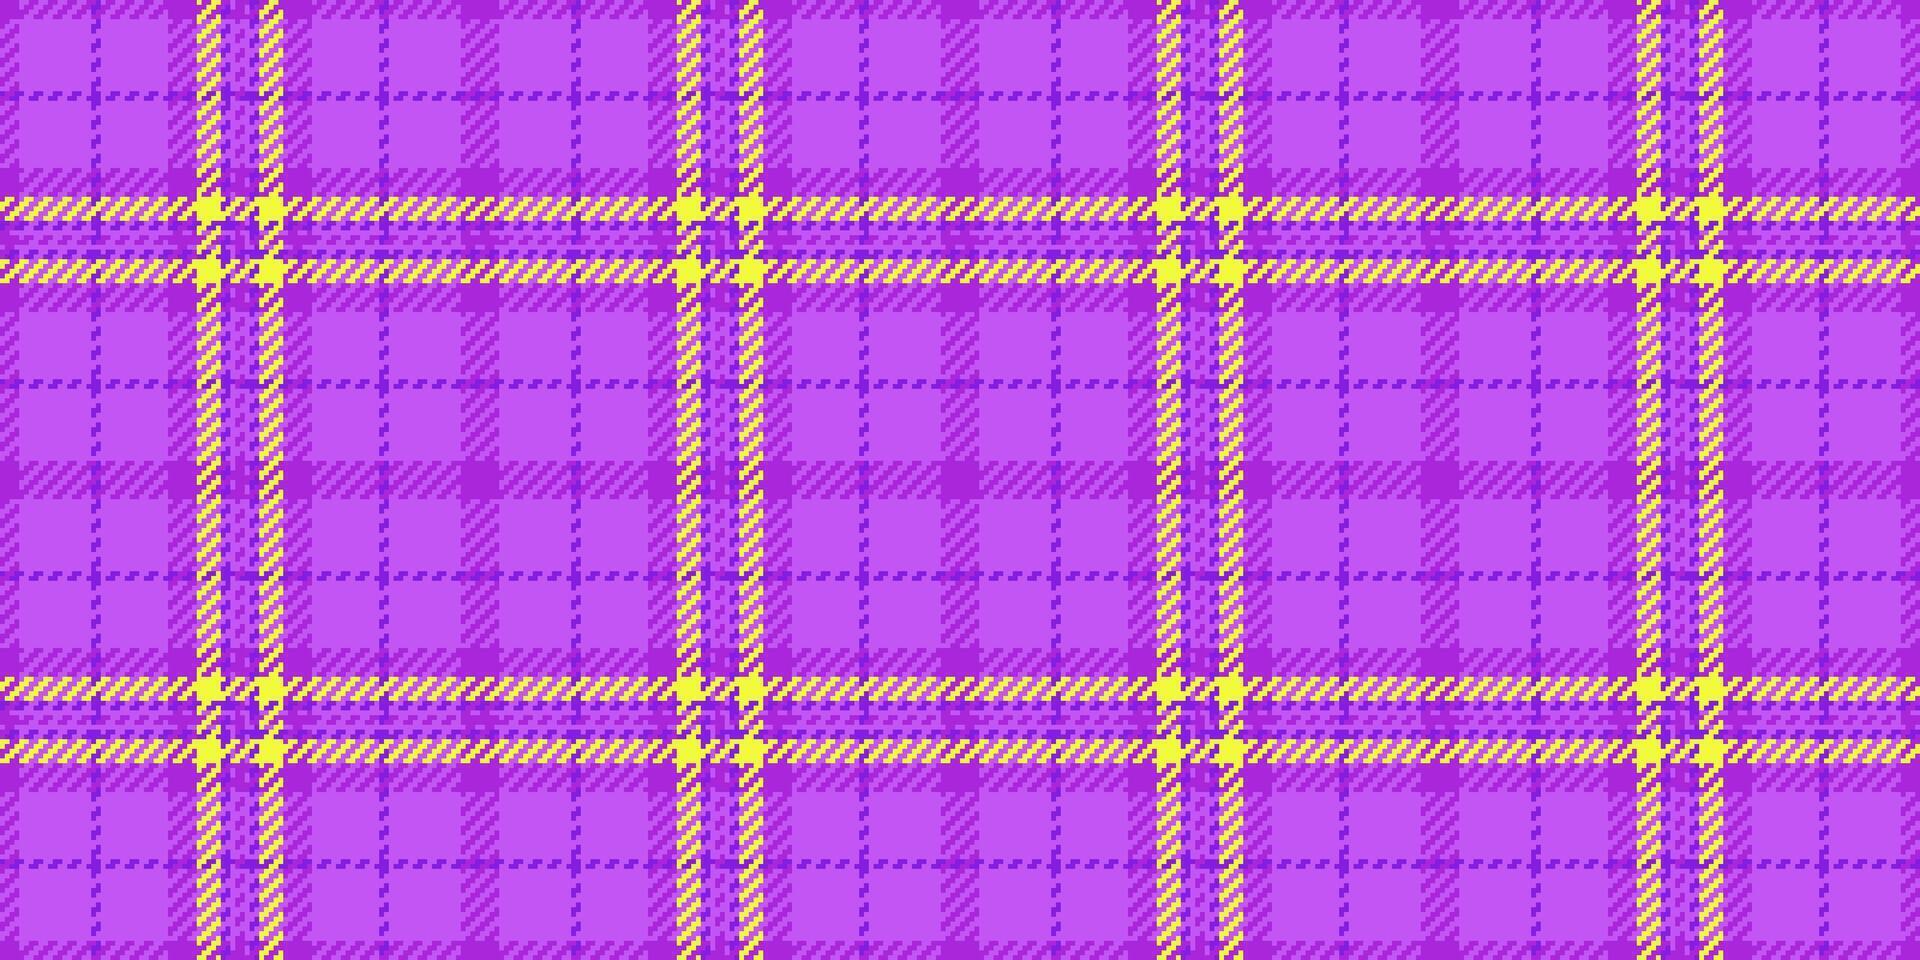 Grungy seamless background fabric, victorian vector check textile. Serene plaid texture tartan pattern in purple and lime colors.